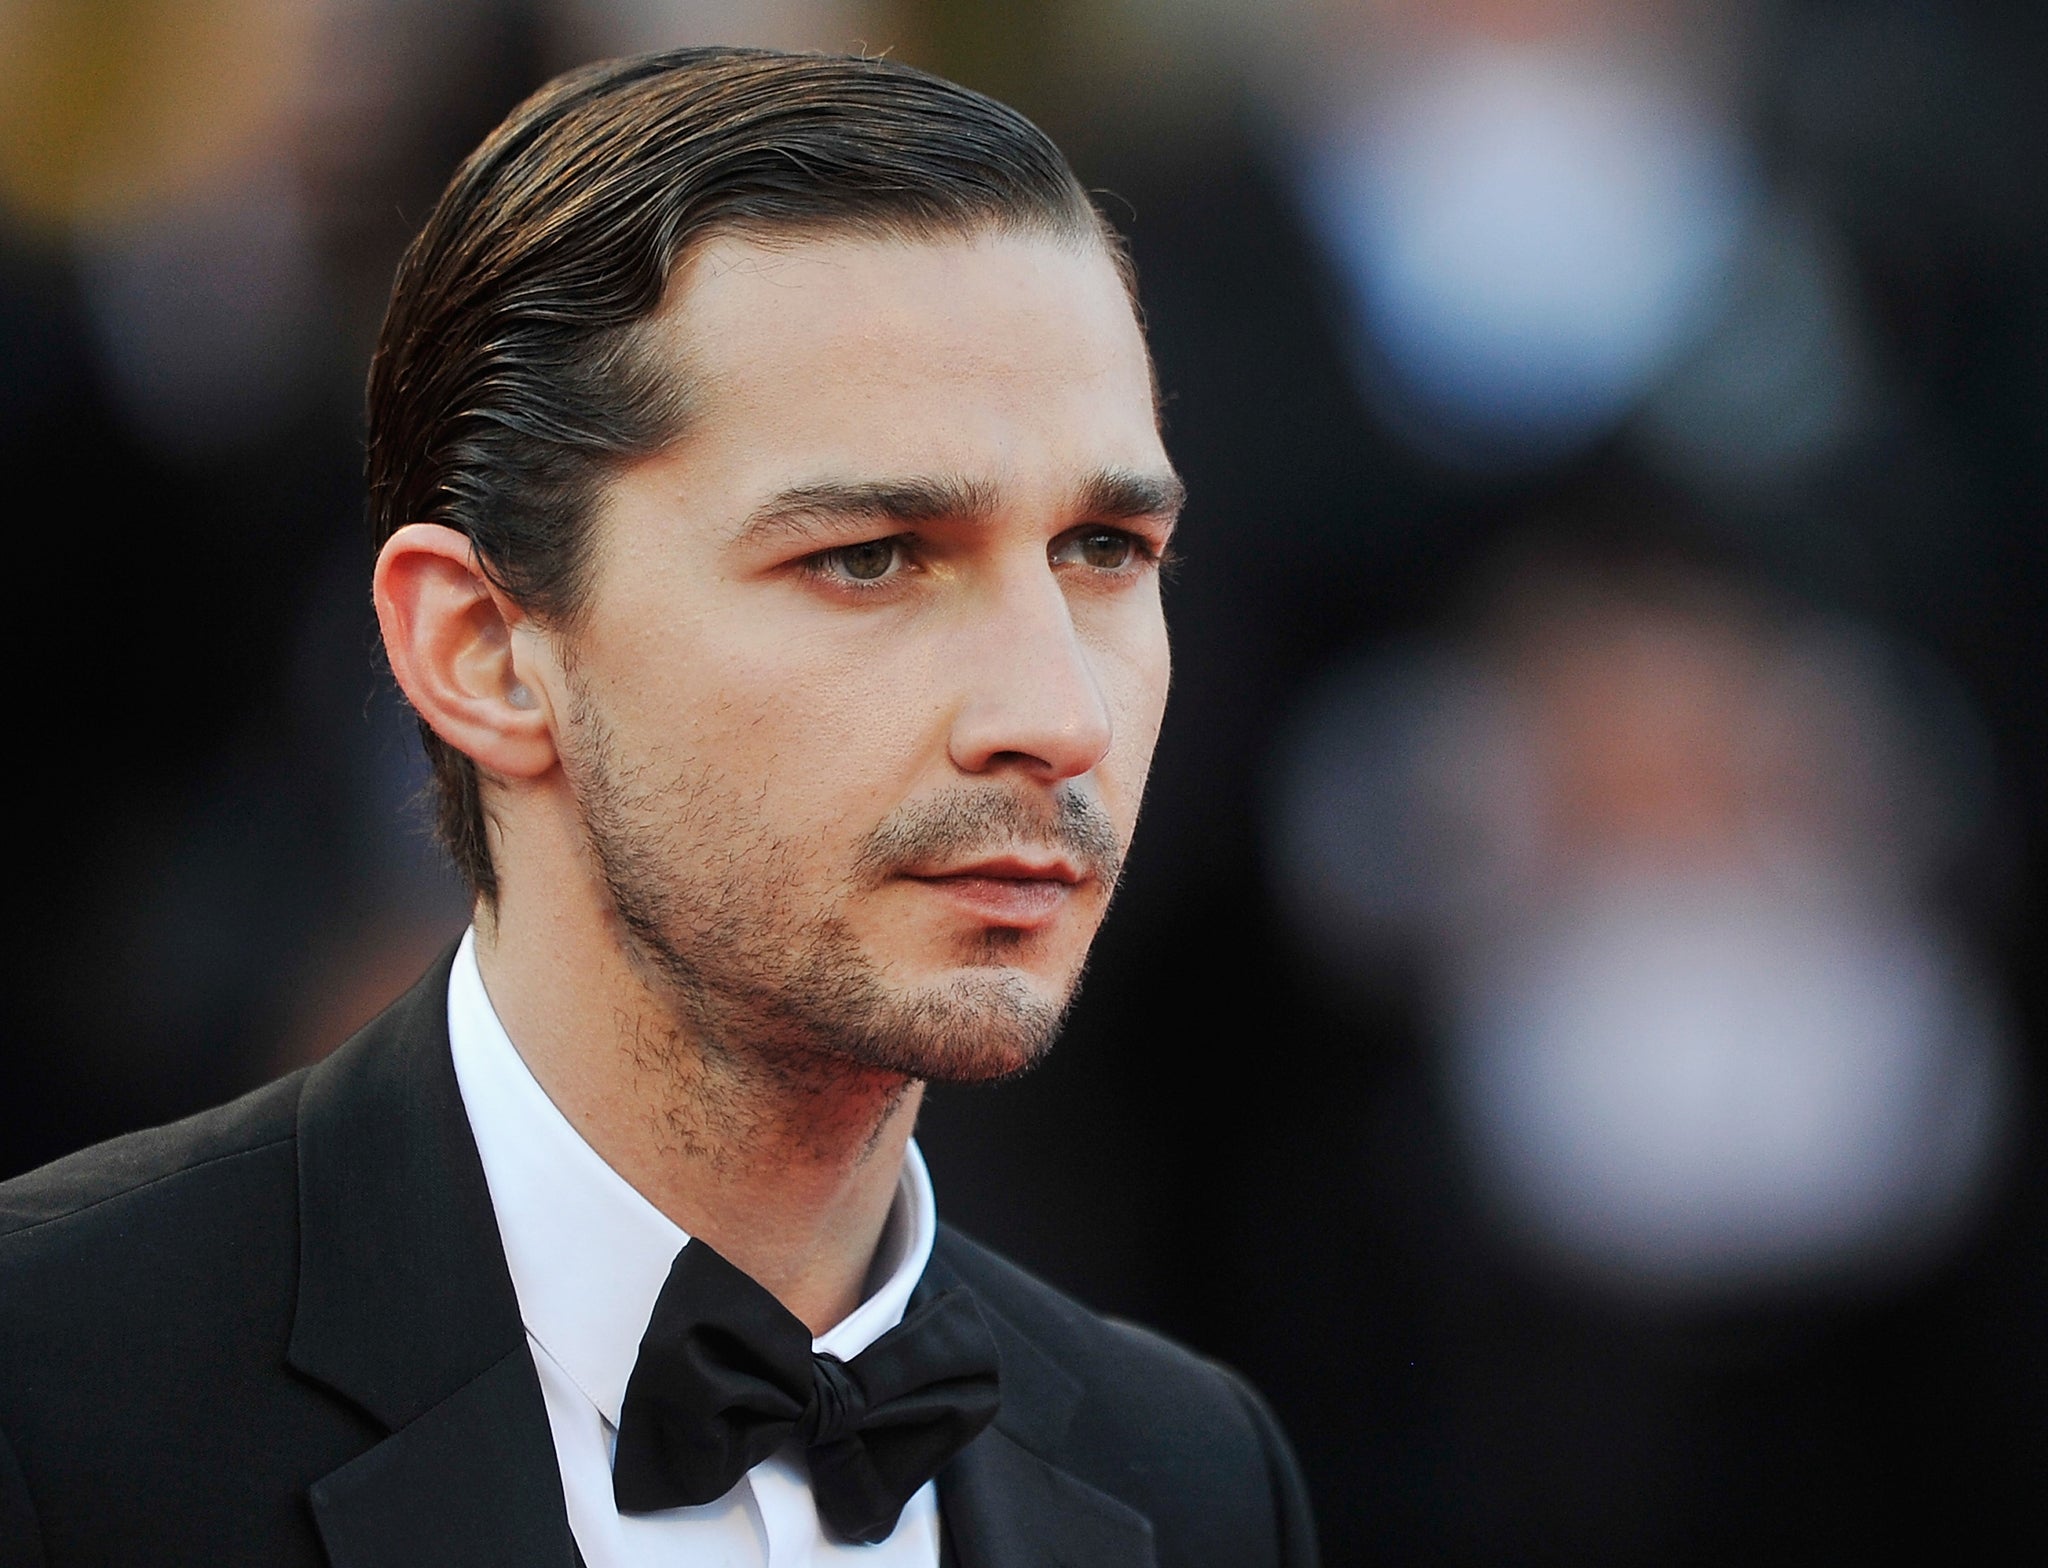 Shia LaBeouf just cannot seem to stop plagiarising, as his spate of eccentric behaviour continues